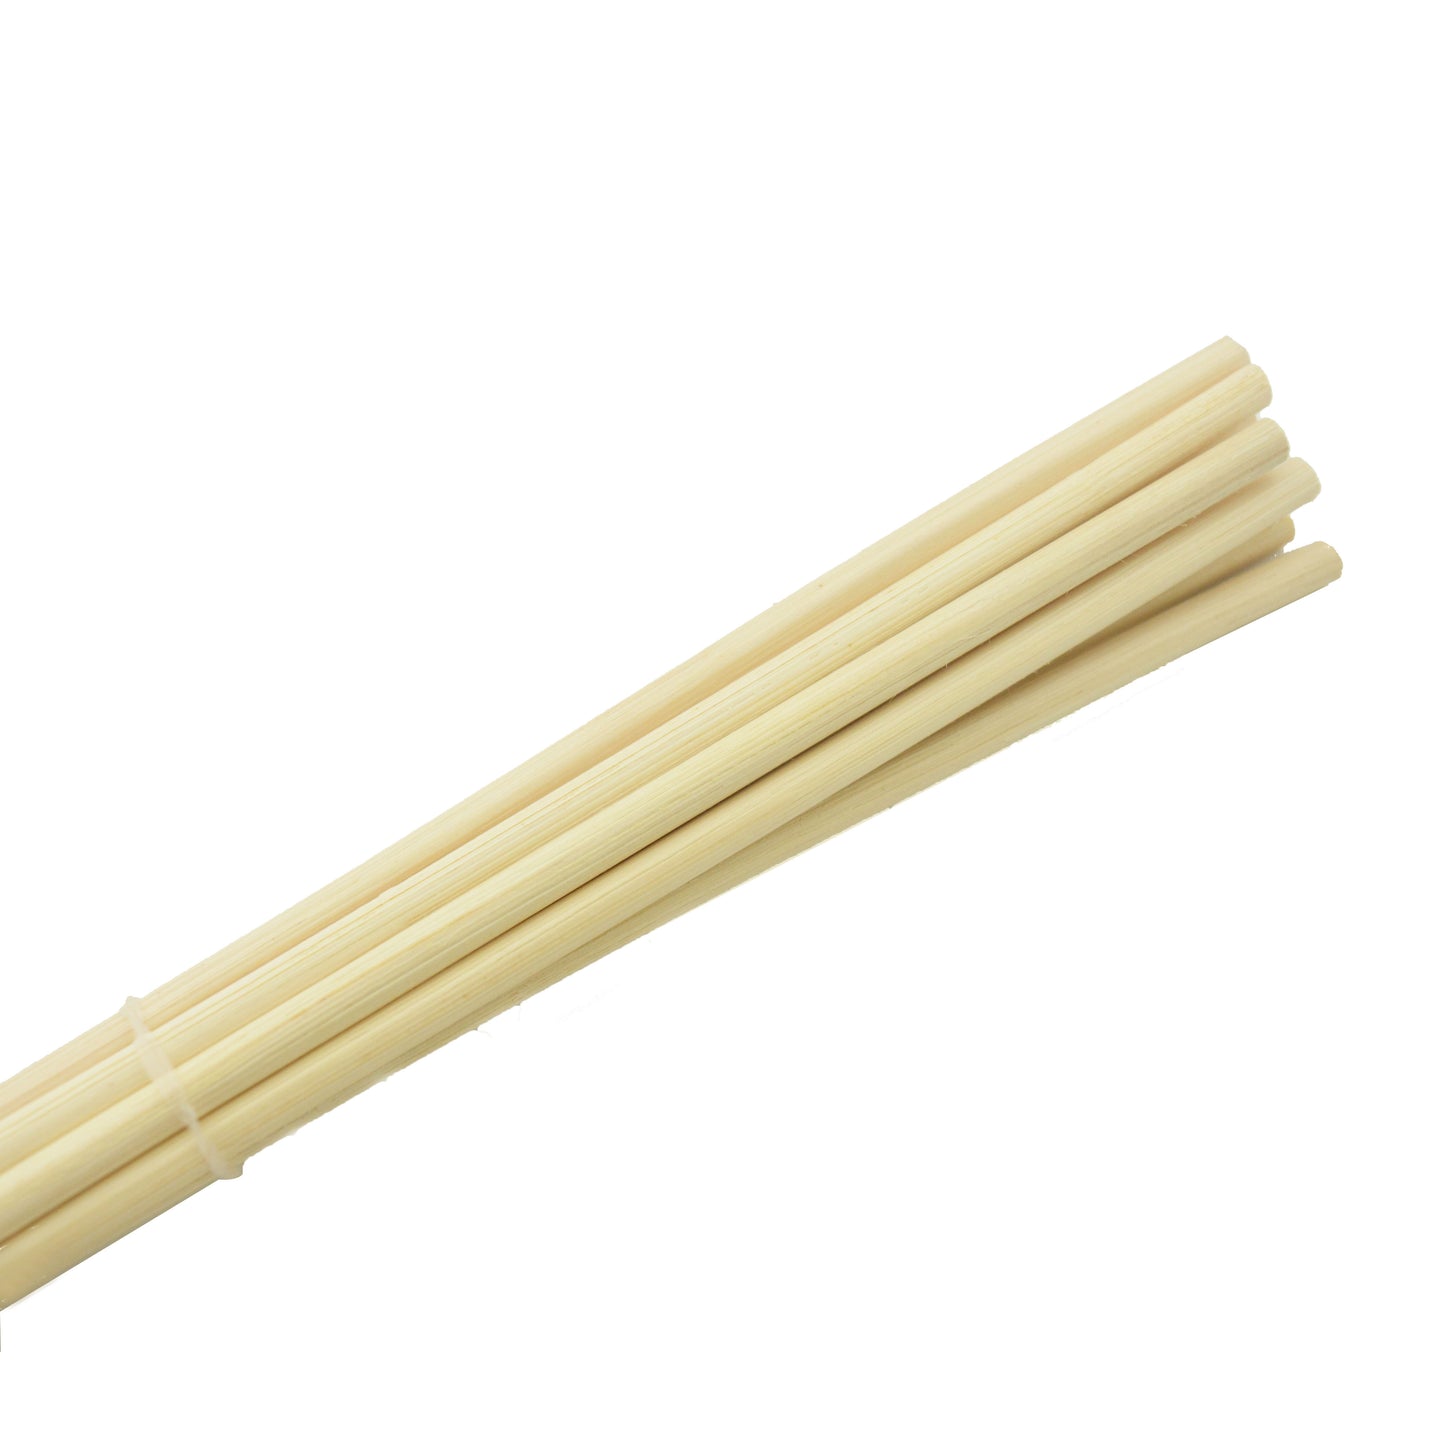 Diffuser Reeds (5mm x 250mm) - Natural 10pc